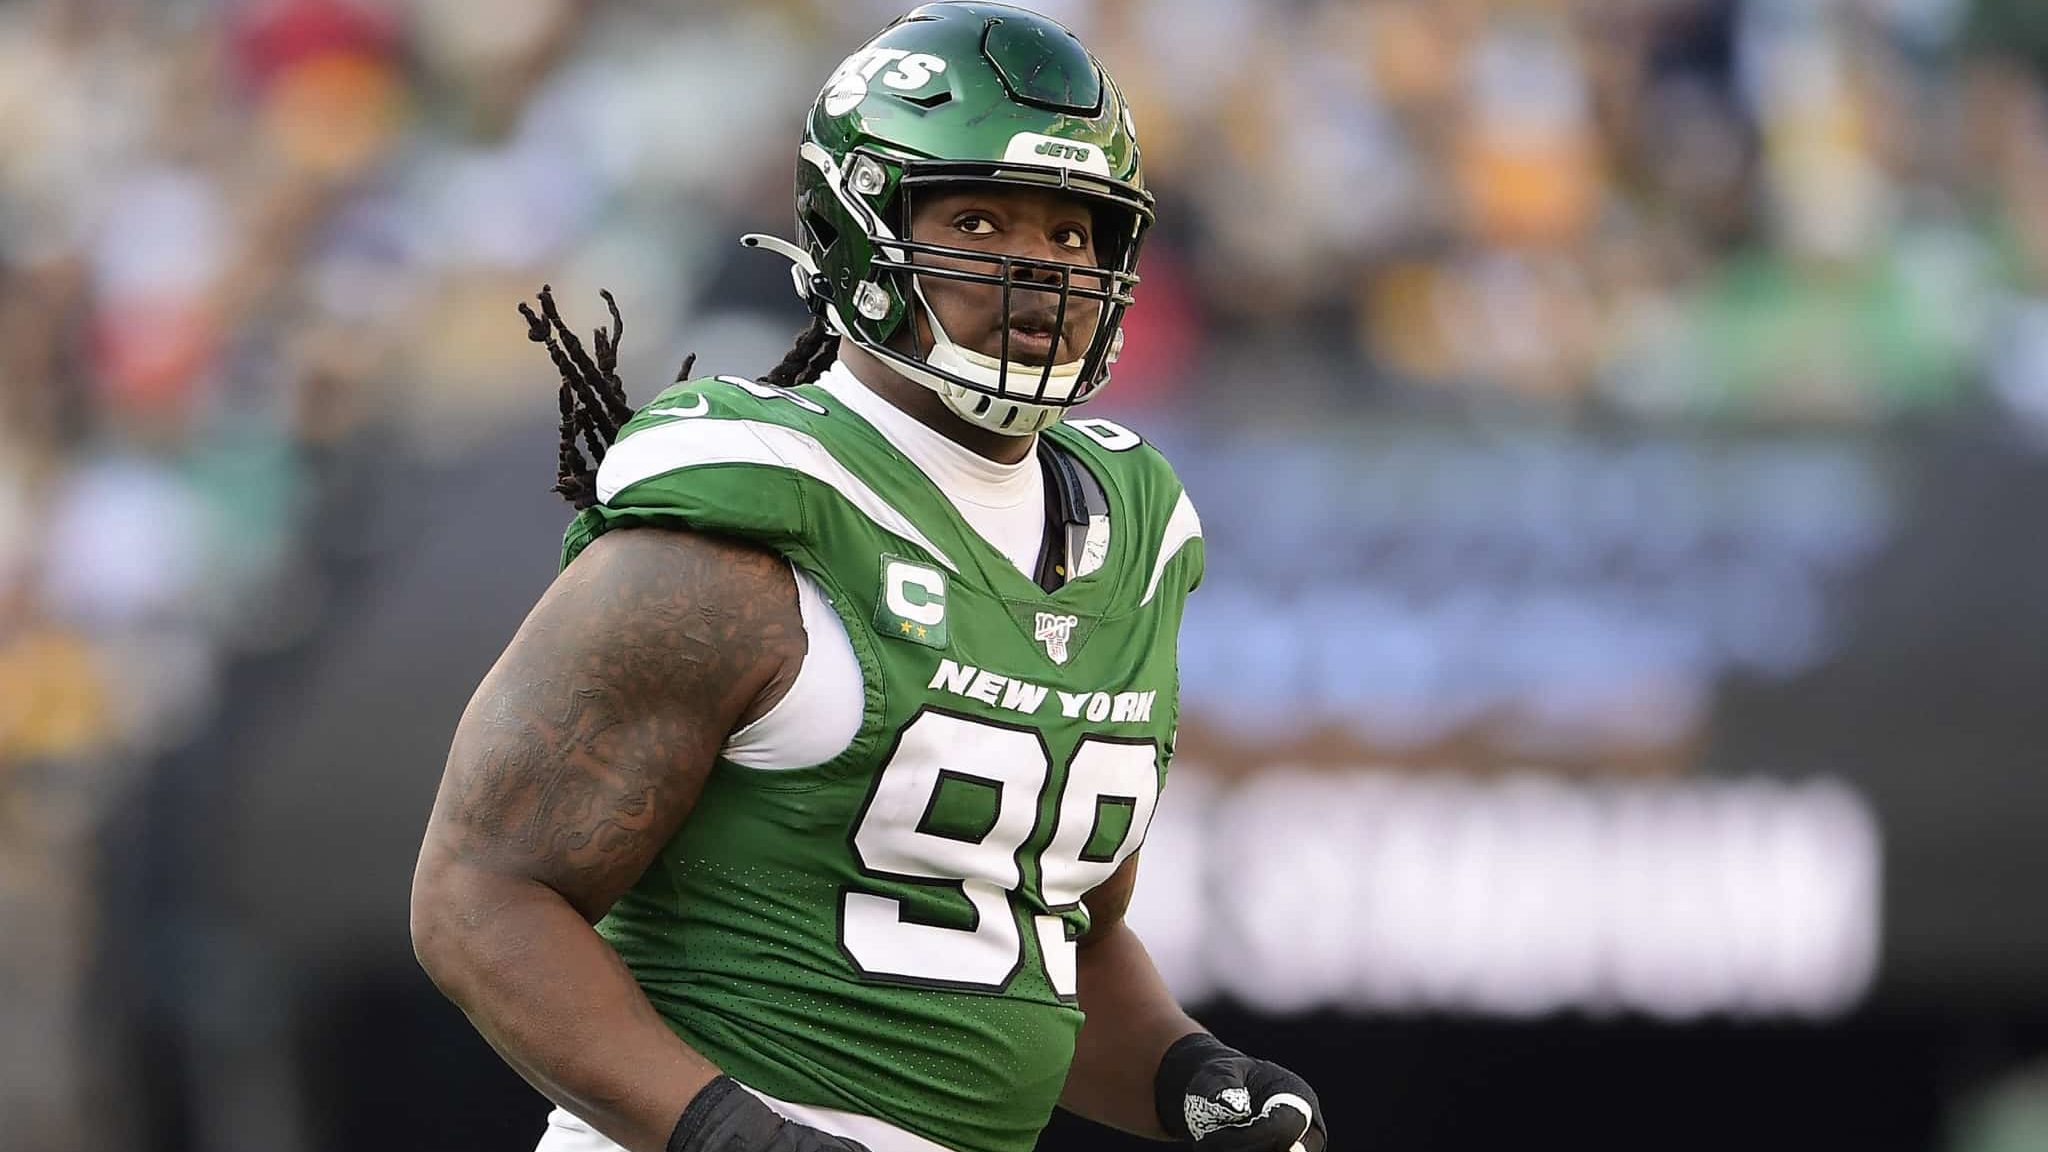 EAST RUTHERFORD, NEW JERSEY - DECEMBER 22: Steve McLendon #99 of the New York Jets looks on against the Pittsburgh Steelers at MetLife Stadium on December 22, 2019 in East Rutherford, New Jersey.